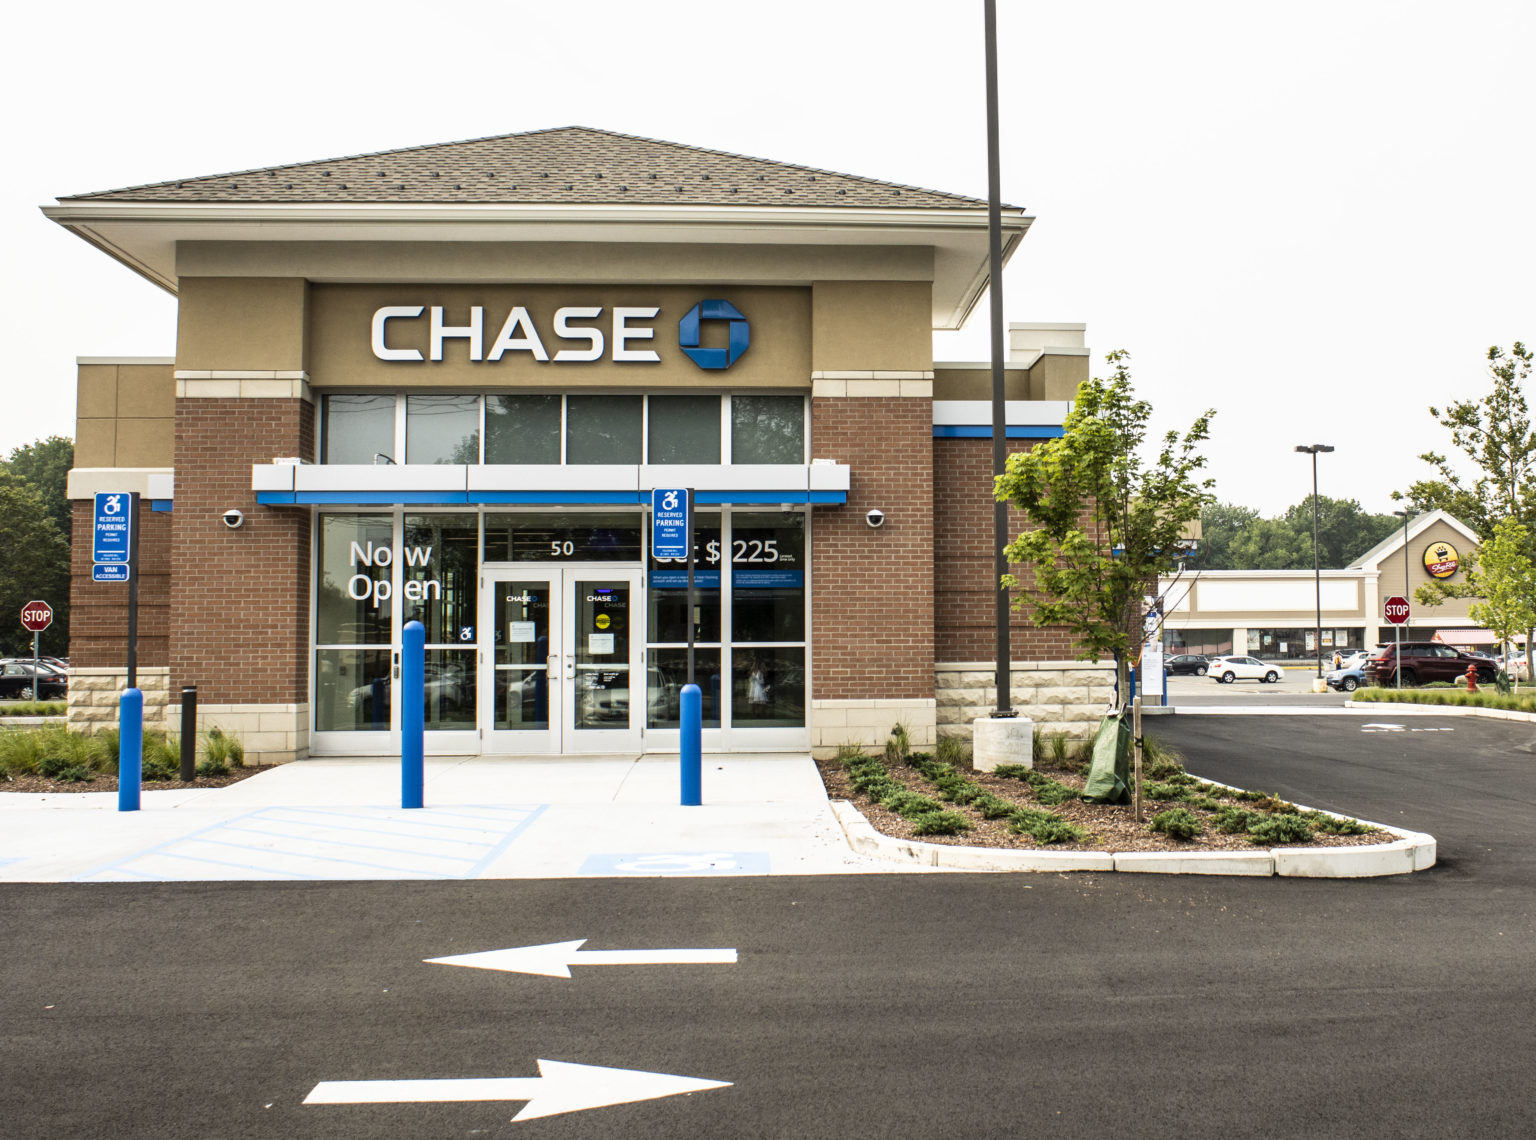 CHASE BANK OPENS NEW BRANCH IN ENFIELD, CT